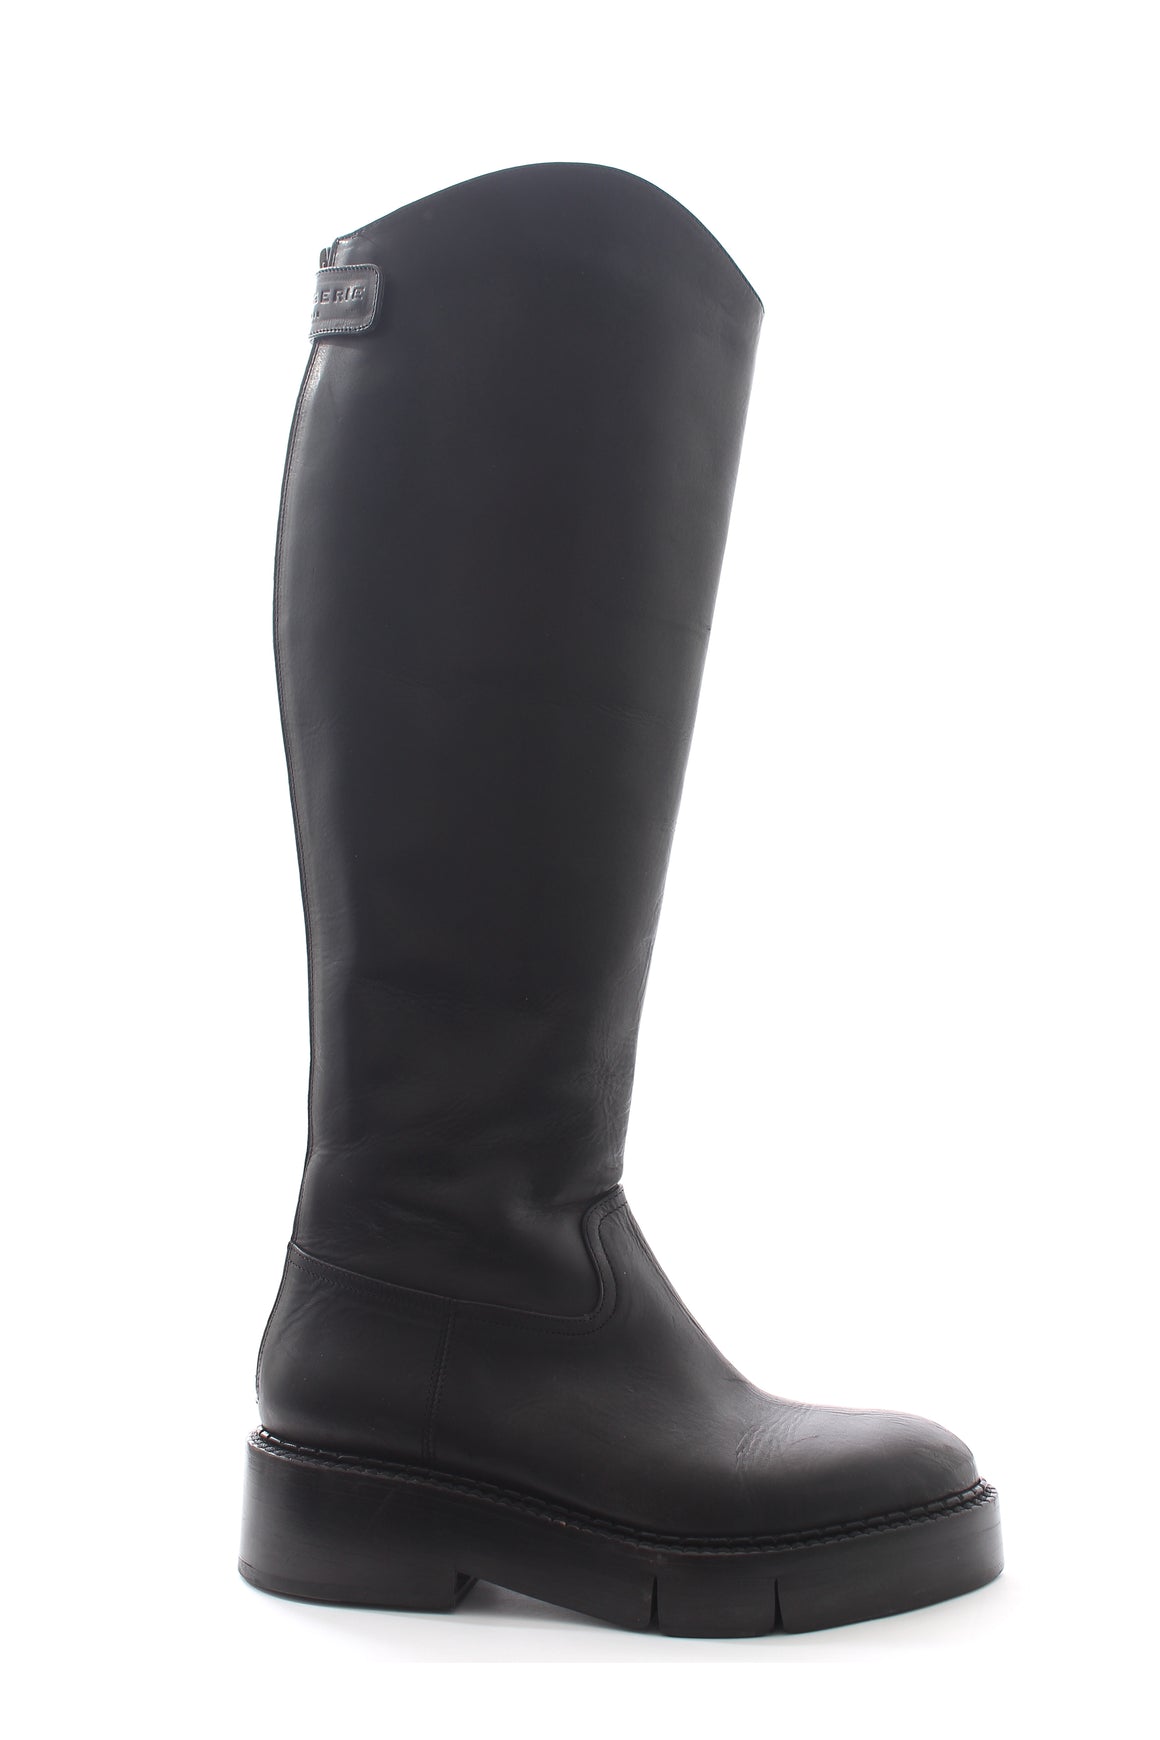 Clergerie Paris Leather Knee-High Boots